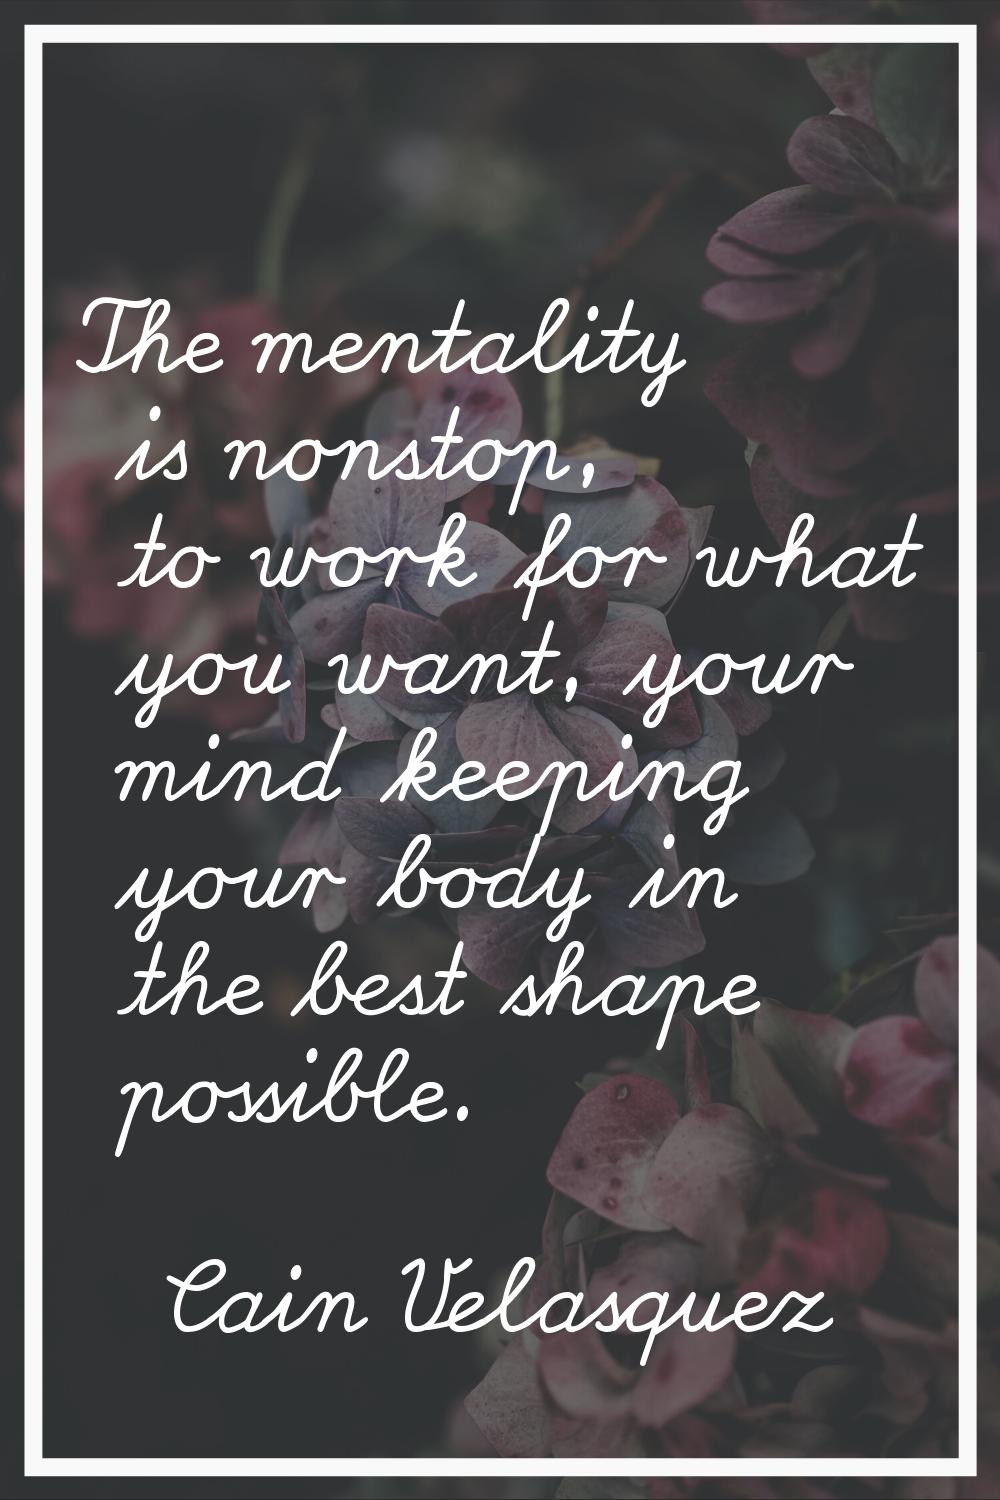 The mentality is nonstop, to work for what you want, your mind keeping your body in the best shape 